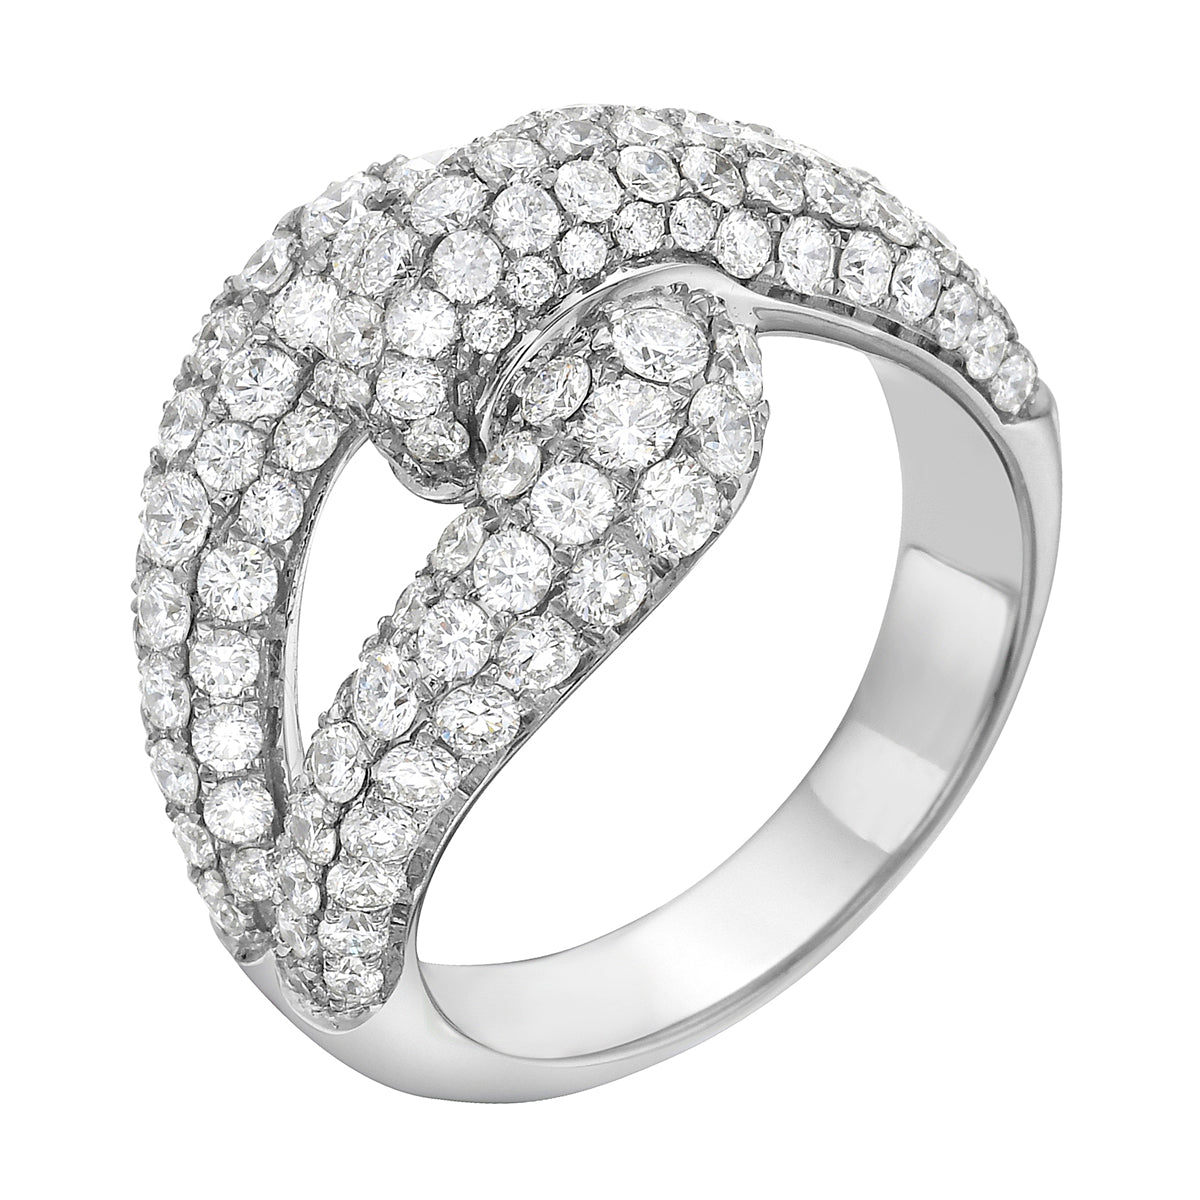 Ring 18KW/8.5G 138RD-2.45CT